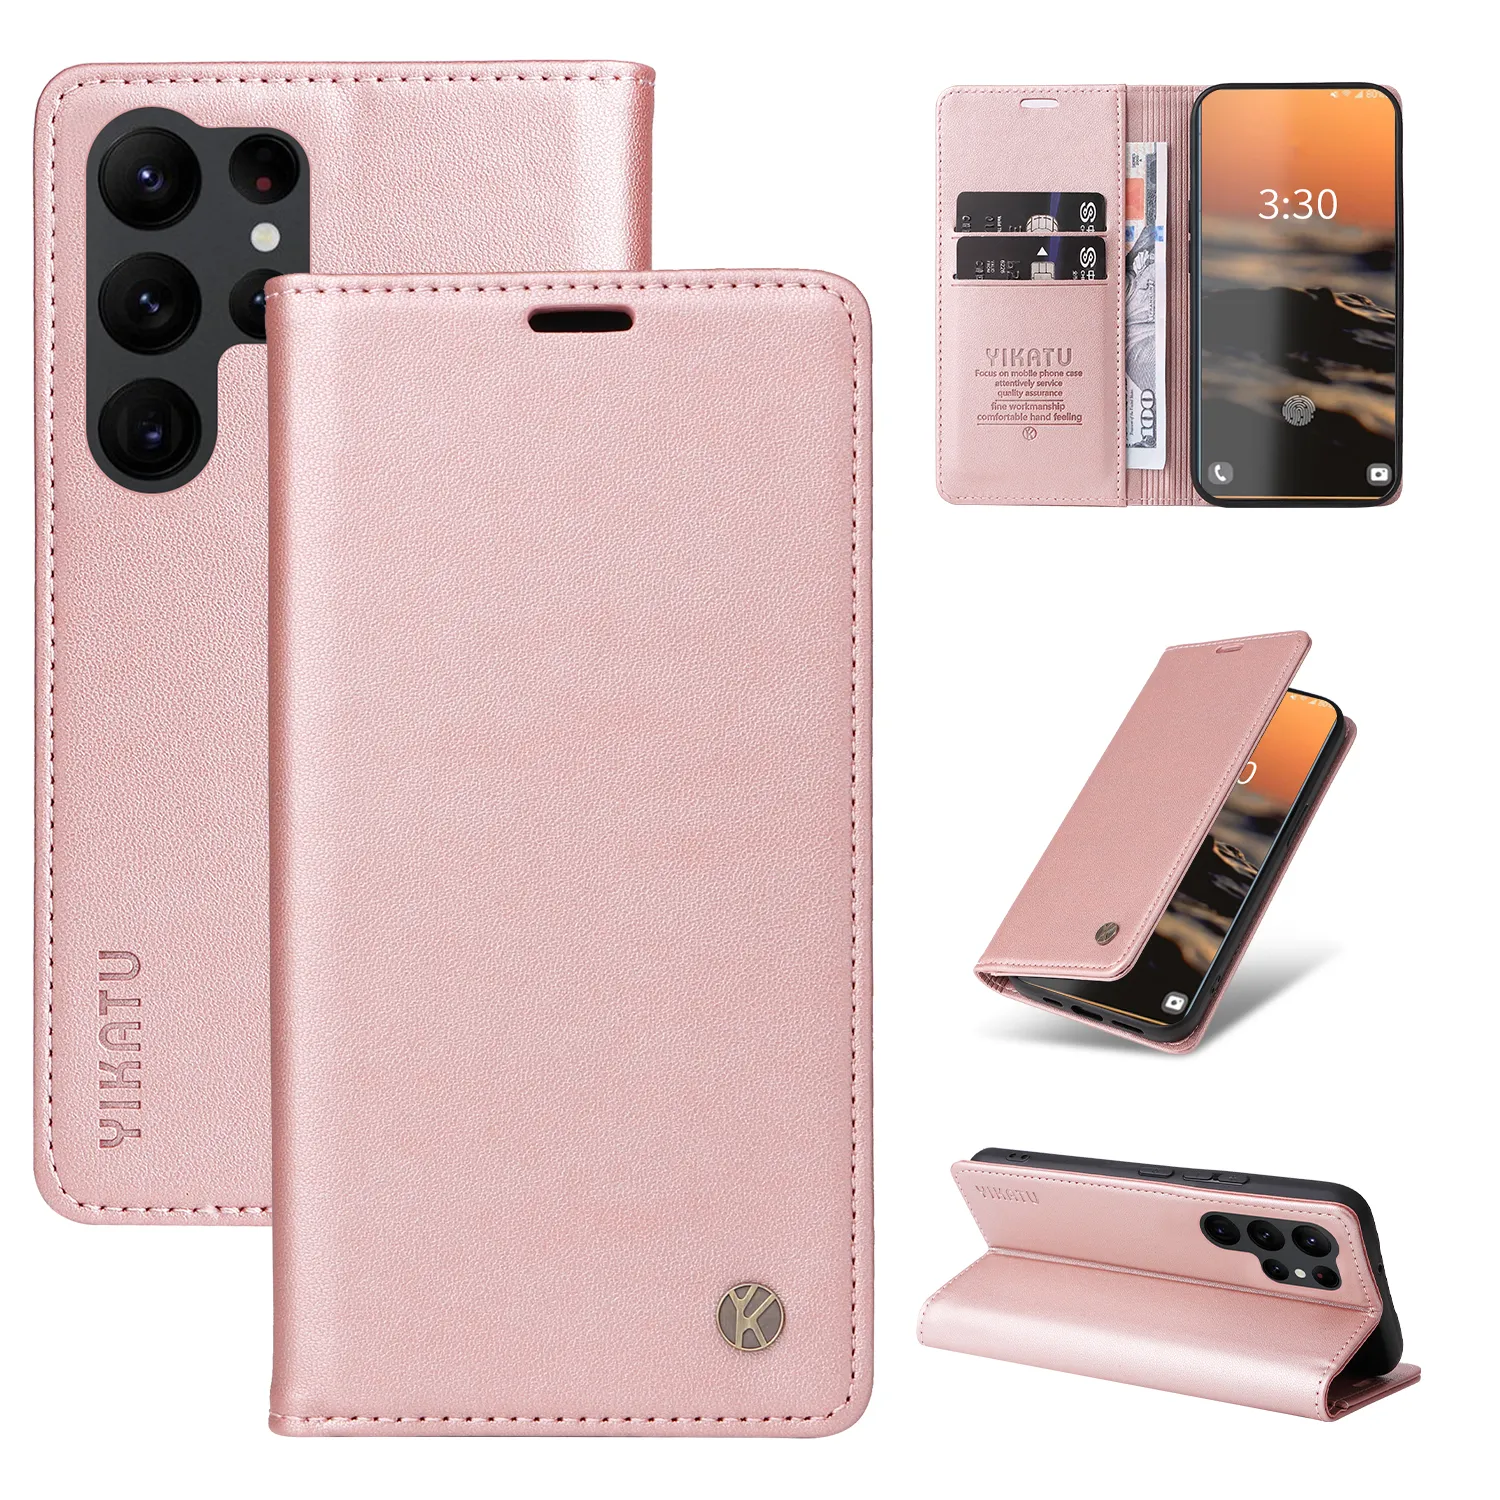 Pu Leather Matte Flip Stand Wallet Wallet for Samsung Galaxy S23 Ultra S22 Plus S21 S20 Note 20